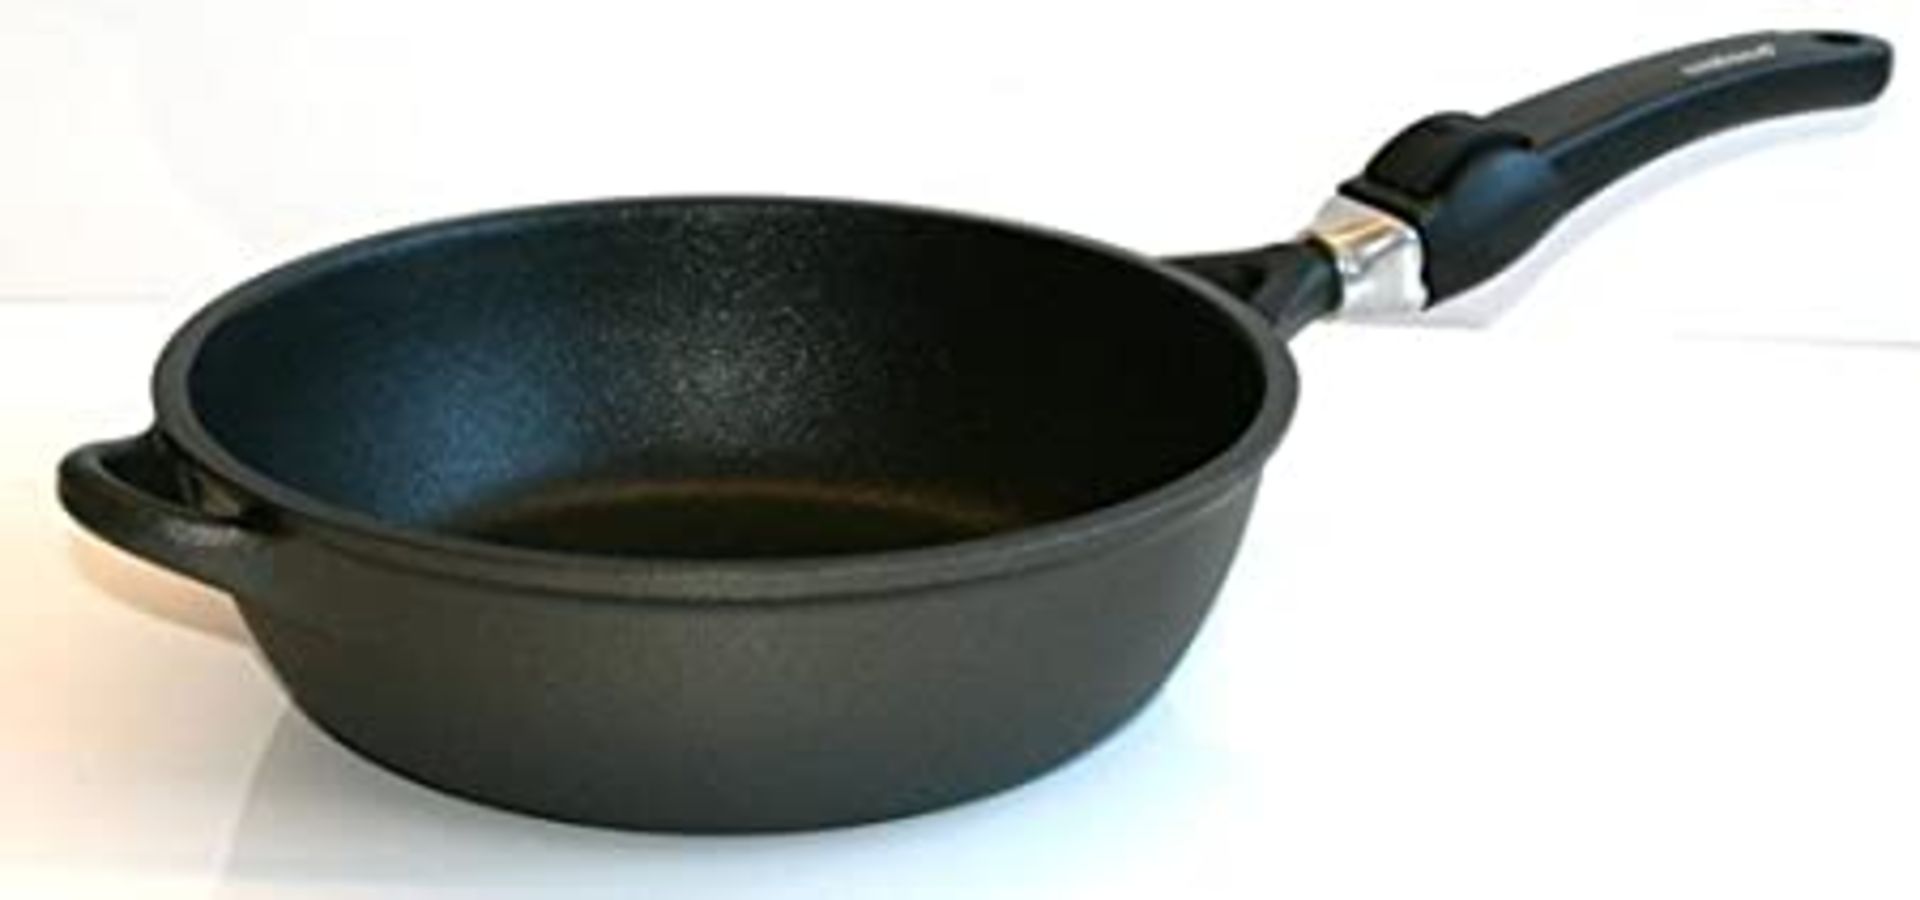 Crafond 24cm Saute Pan with detachable handle and lid - Image 4 of 4